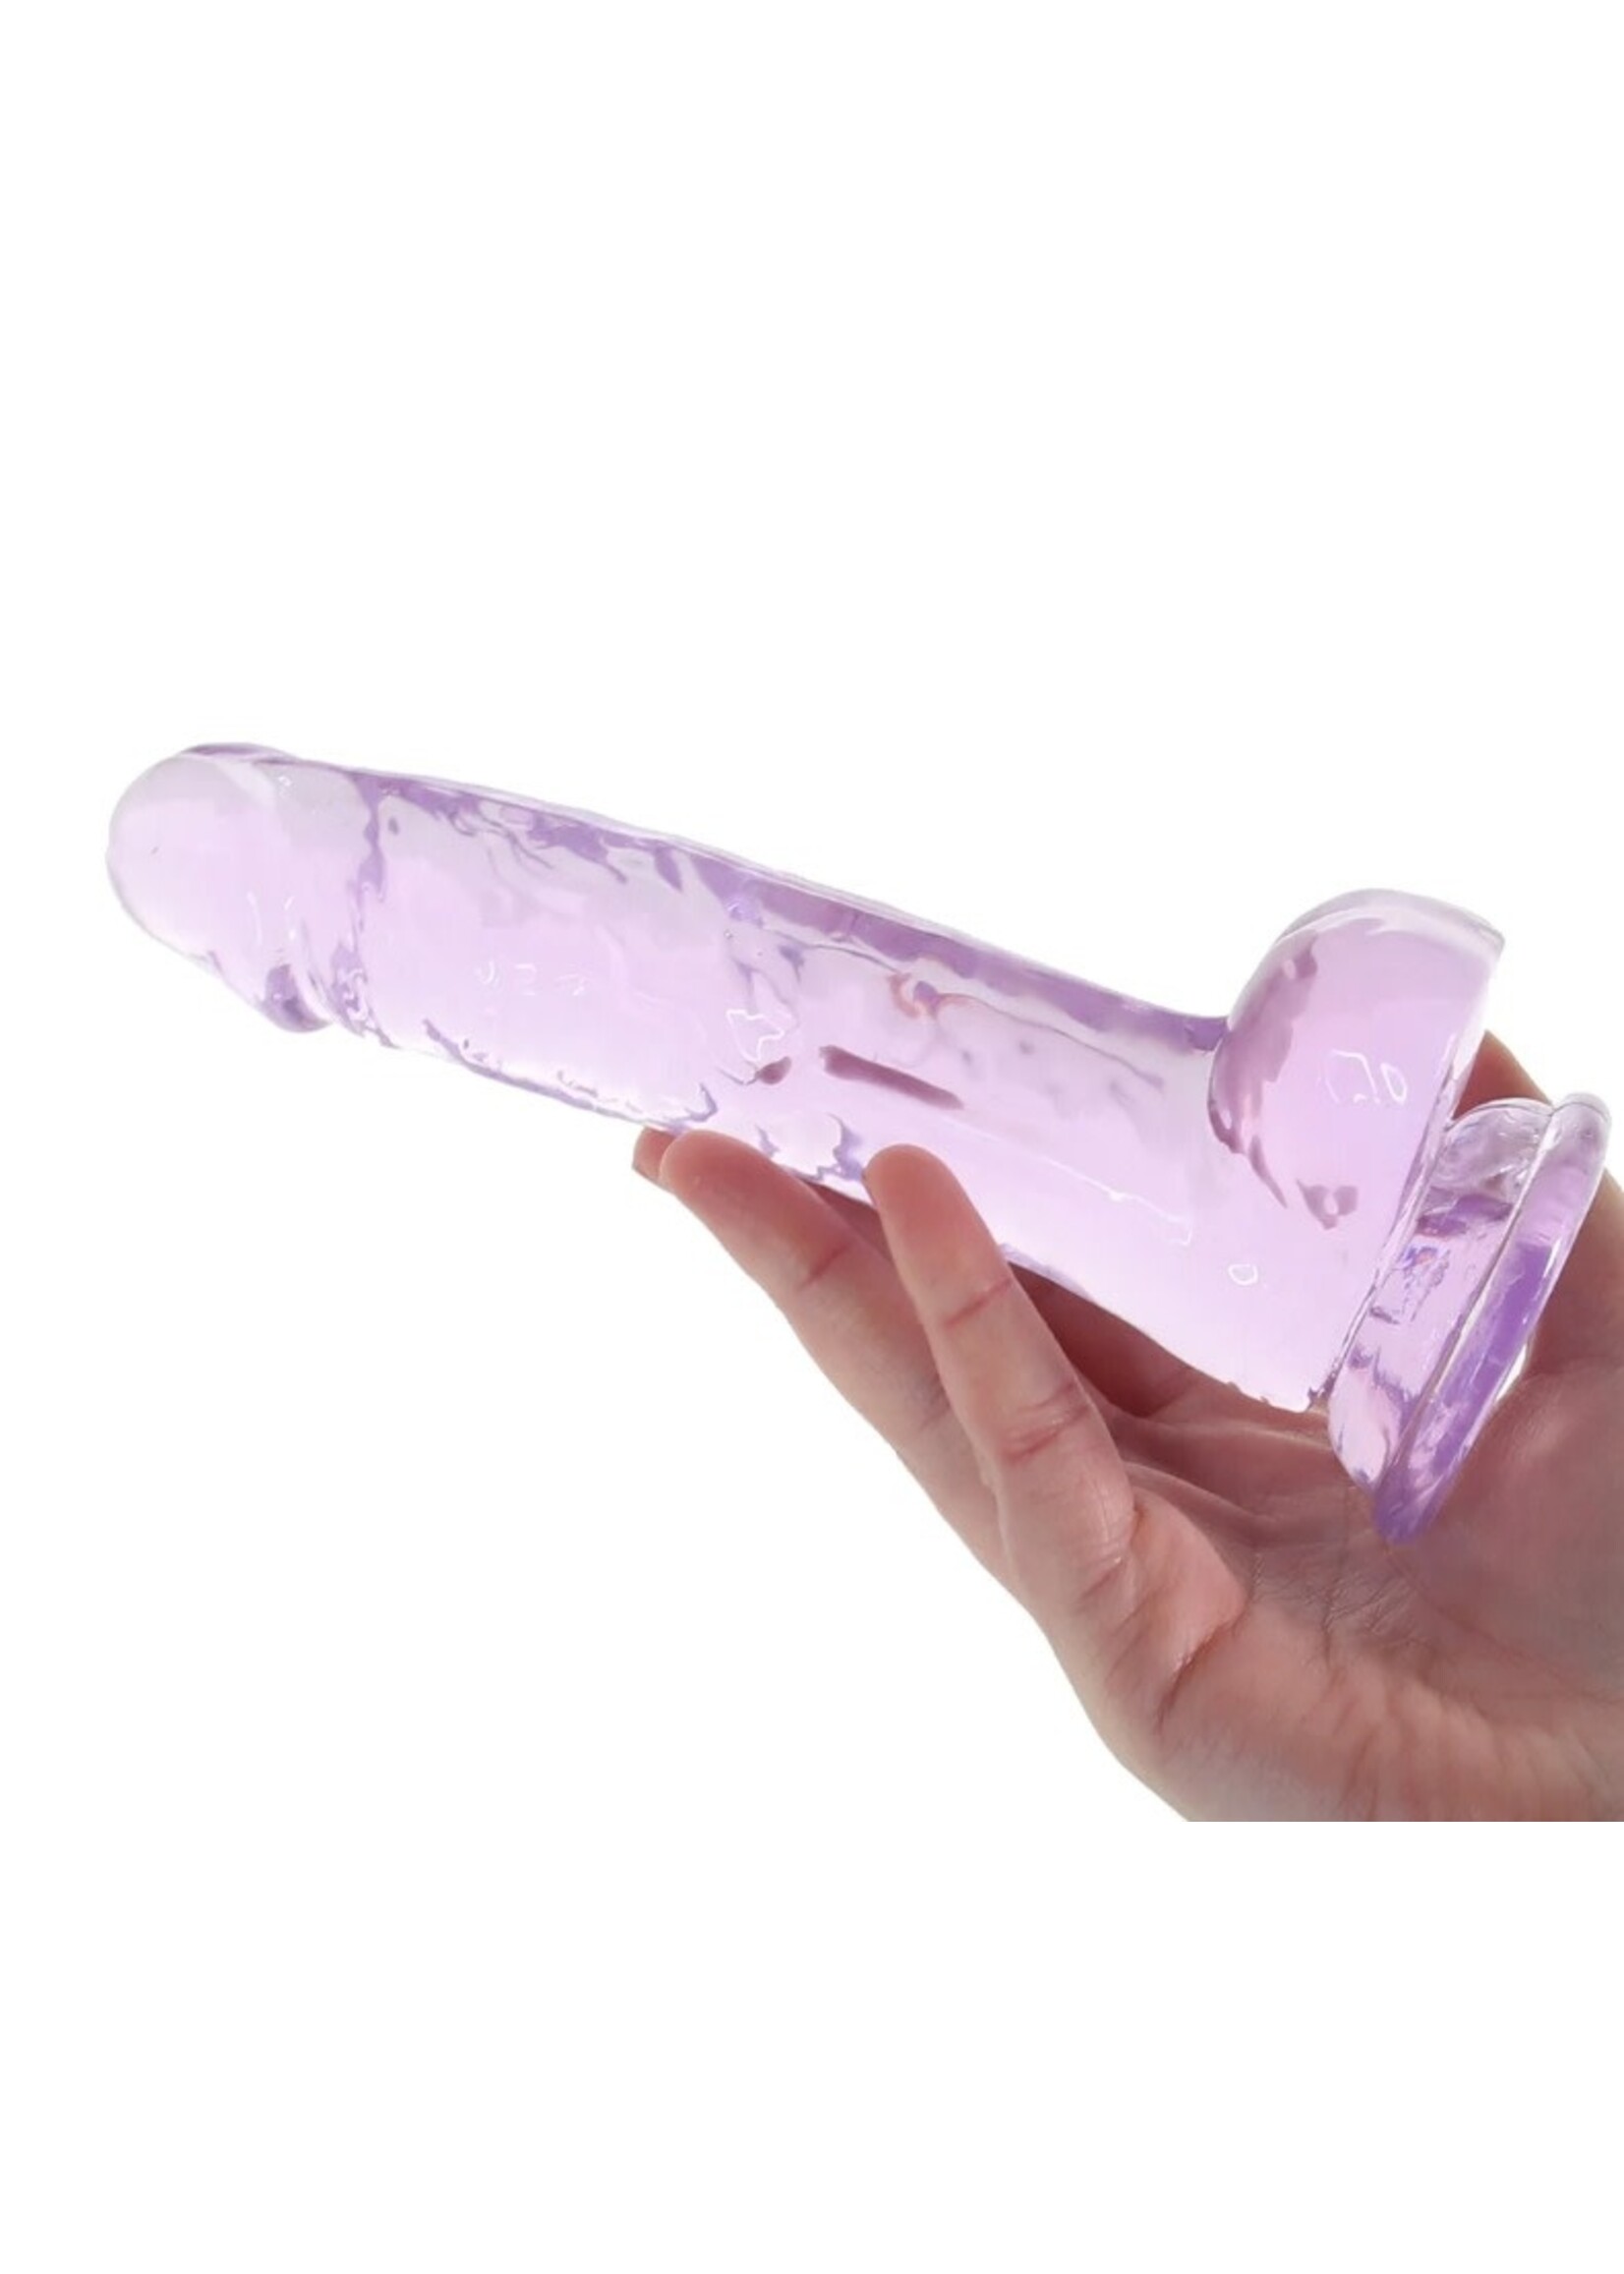 Naturally Yours 7 Inch Crystalline Dildo in Amethyst